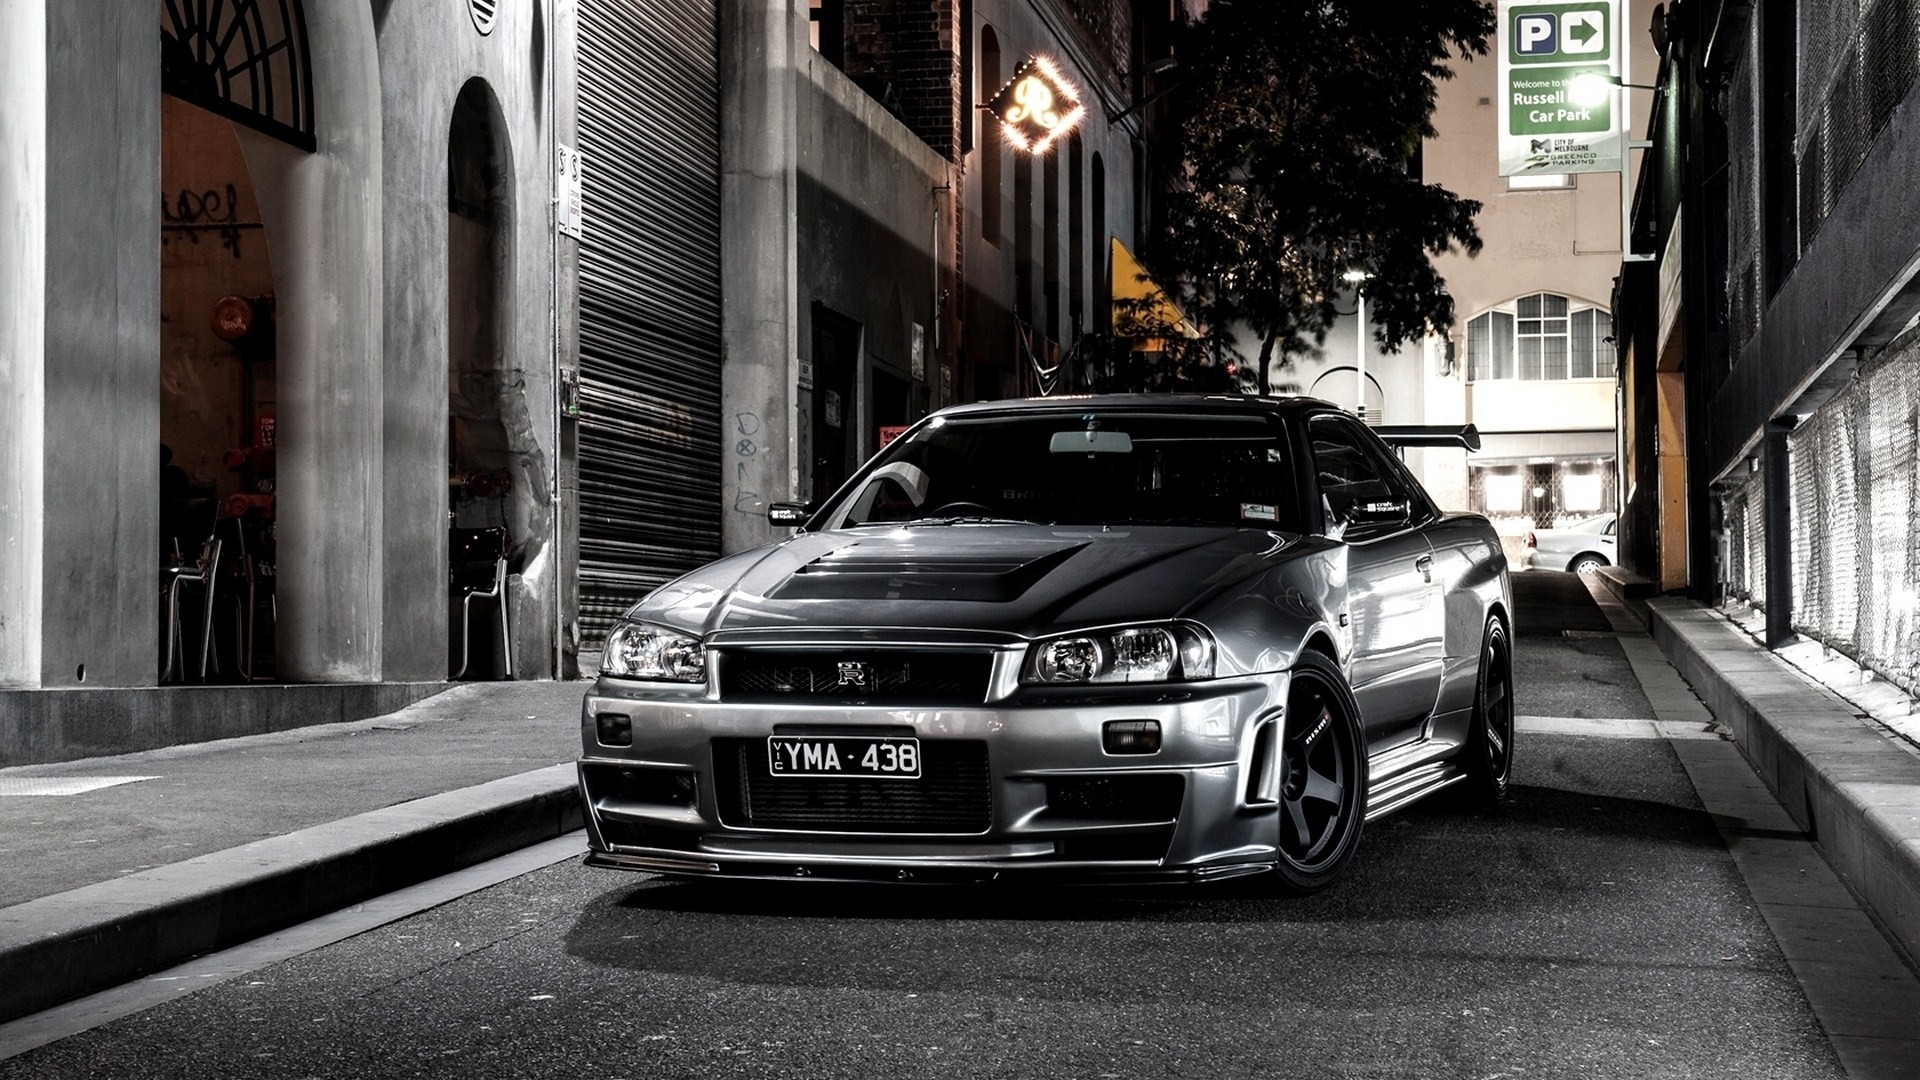 1920x1080 Related Wallpapers from James Bond Wallpaper. R34 36764